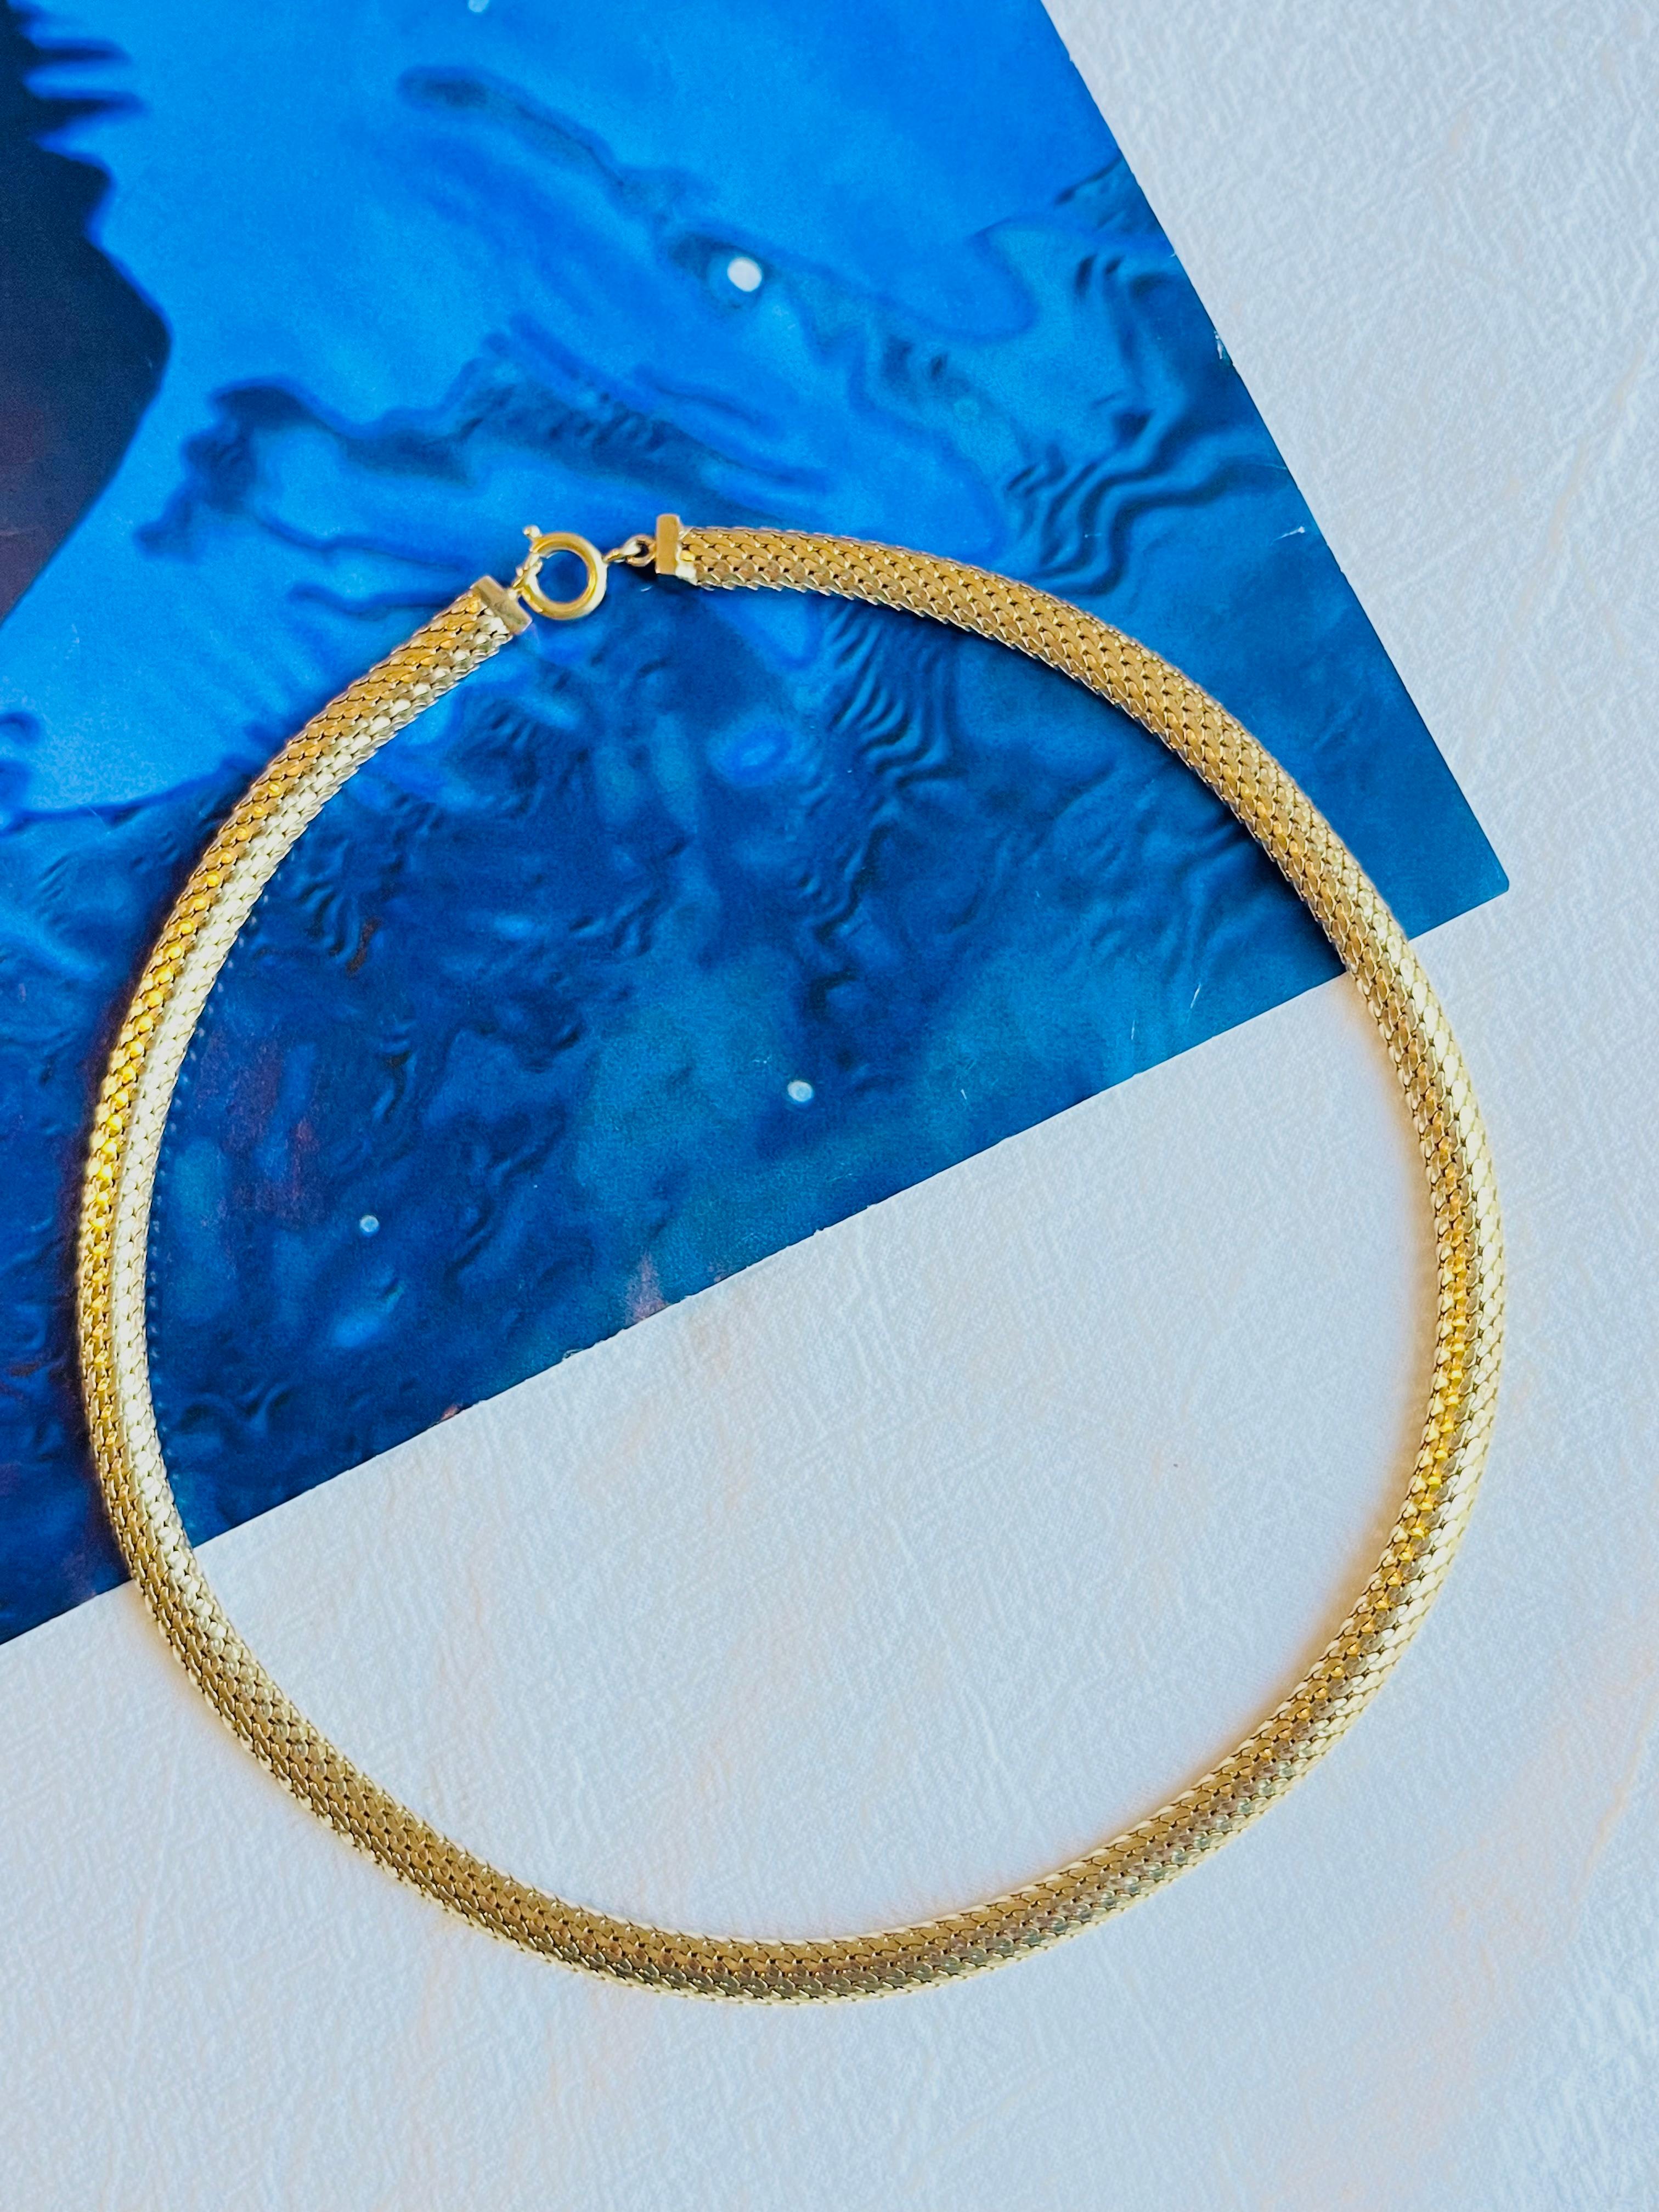 Christian Dior GROSSE 1965 Unisex Herringbone Classic Curb Woven Chain Rope Necklace, Gold Plated

Very excellent condition and very new. Signed Grosse 1965. 100% Genuine. Rare to find.

Versatile necklace. Worn the necklace or add a pendant.

Size: